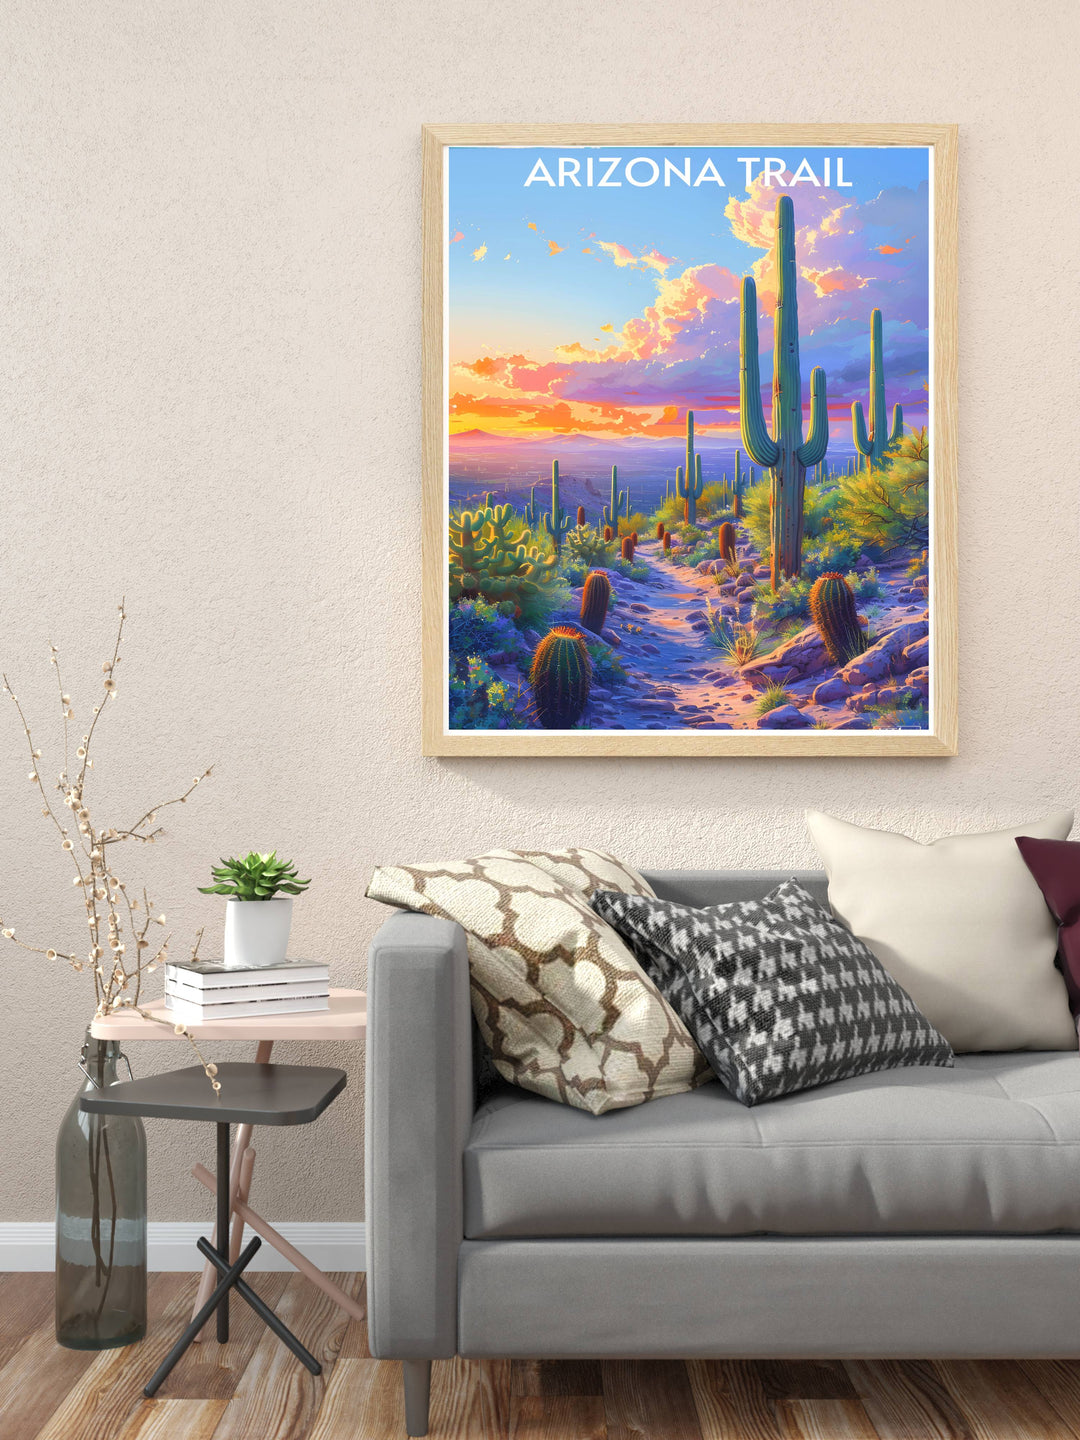 Framed print of Saguaro National Park capturing the majestic beauty of the desert landscape a timeless piece of art for any decor perfect as a gift for hikers and nature enthusiasts.